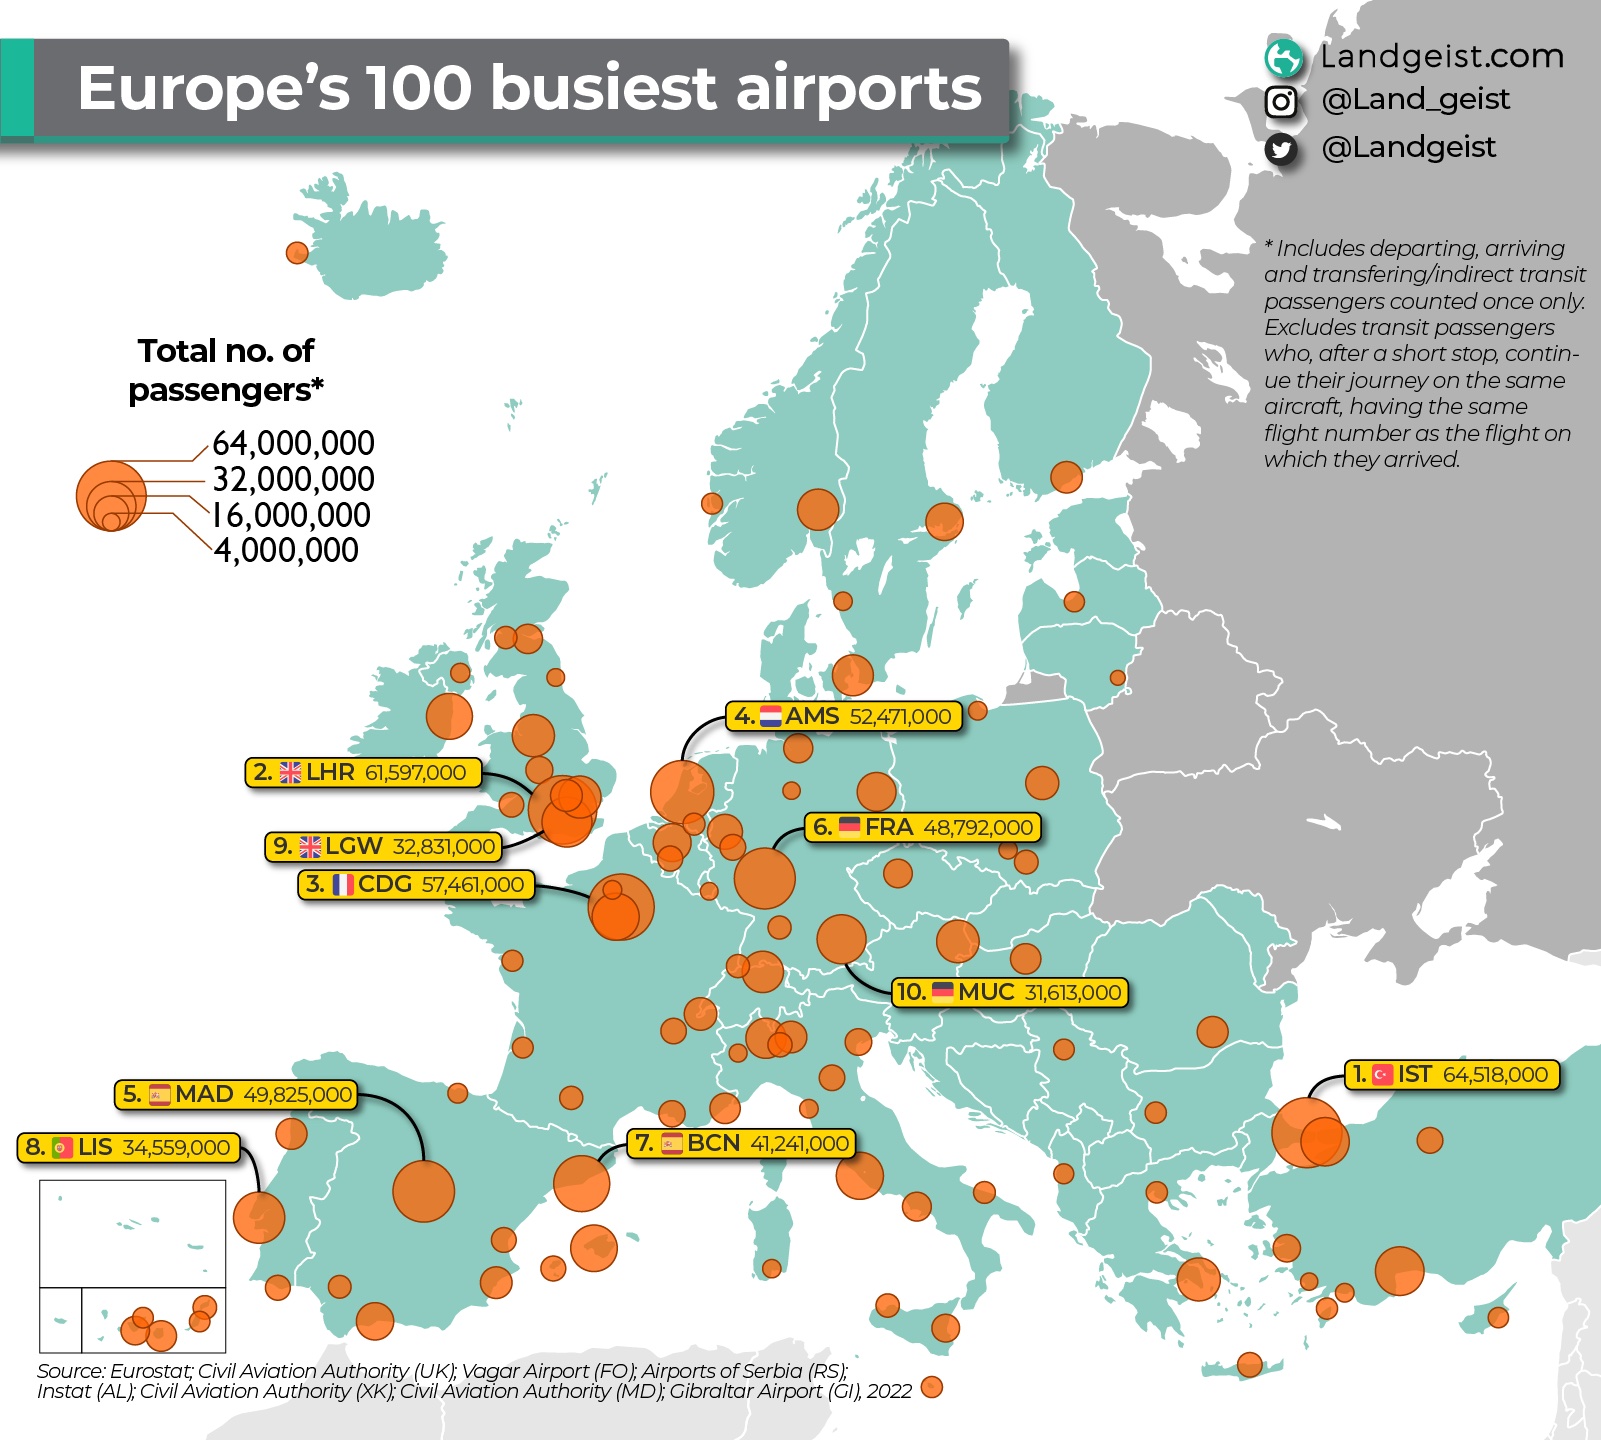 Europe's 100 busiest airports.